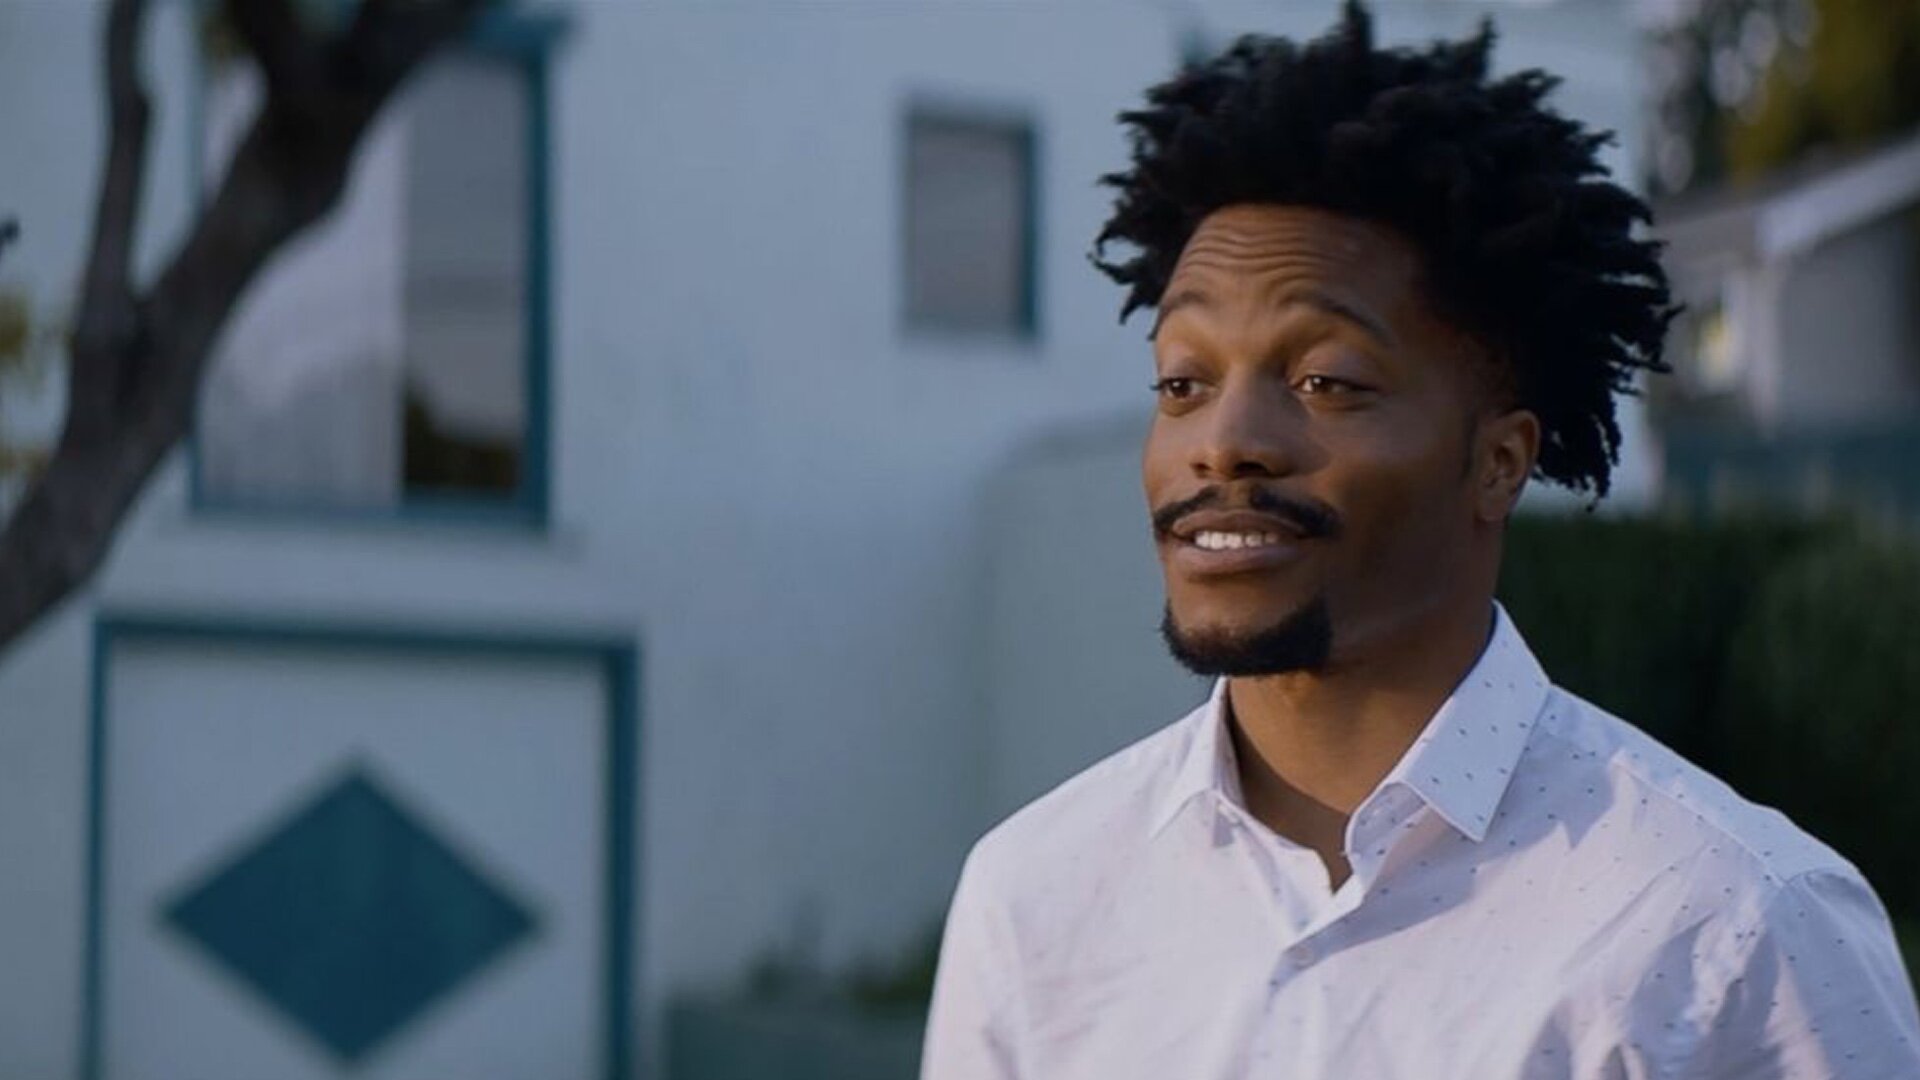 Fox Is Developing an Animated Series from Comedian Jermaine Fowler.